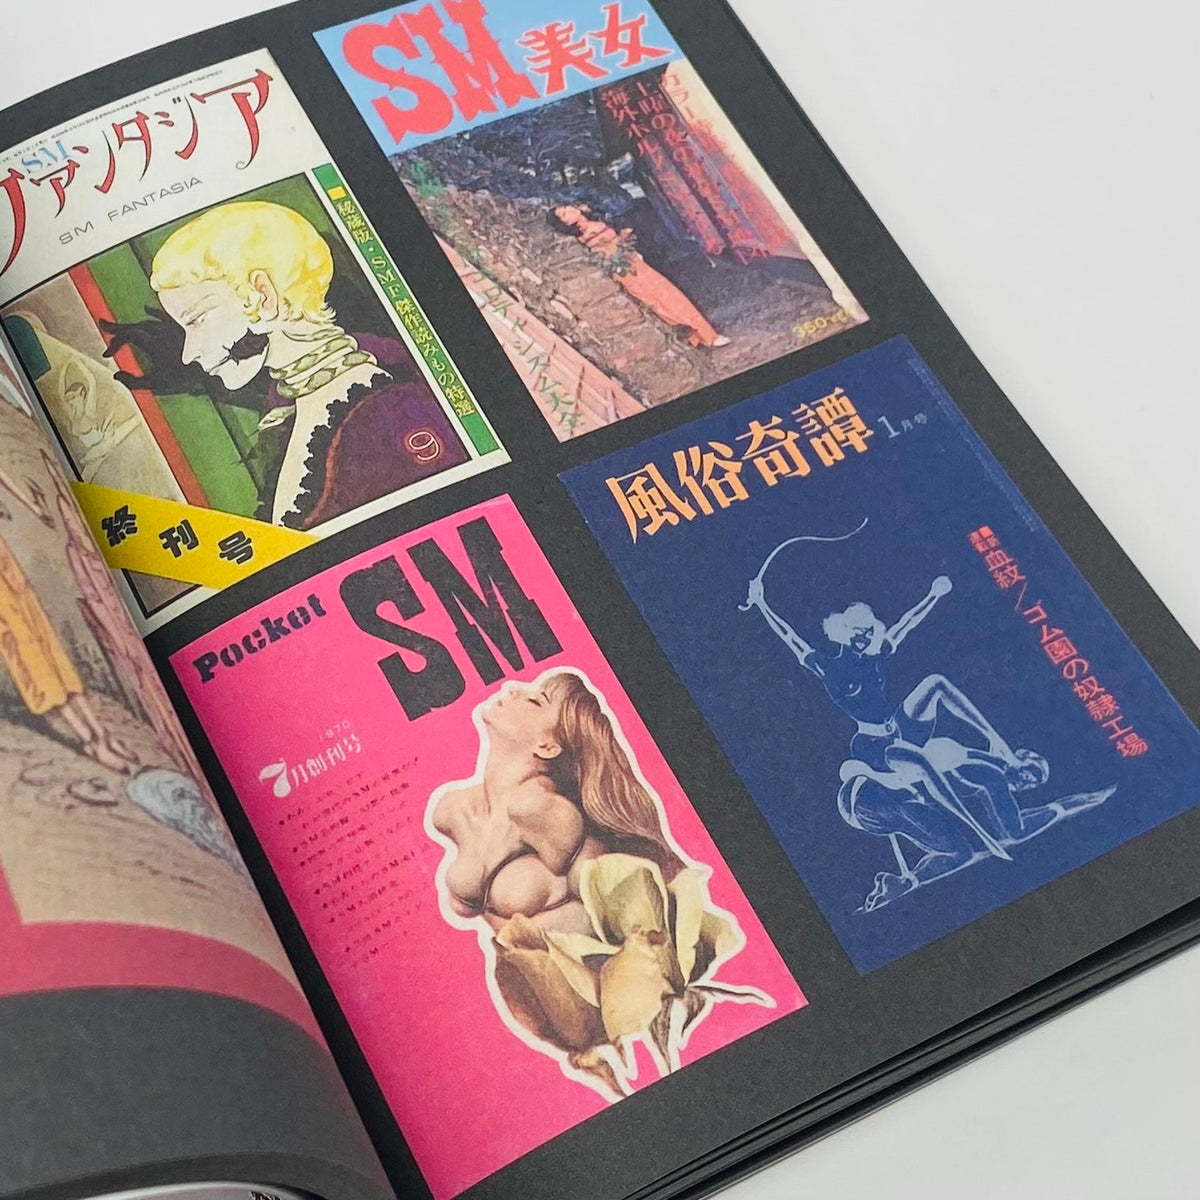 BDSM Magazines from Japan (1950-2010)